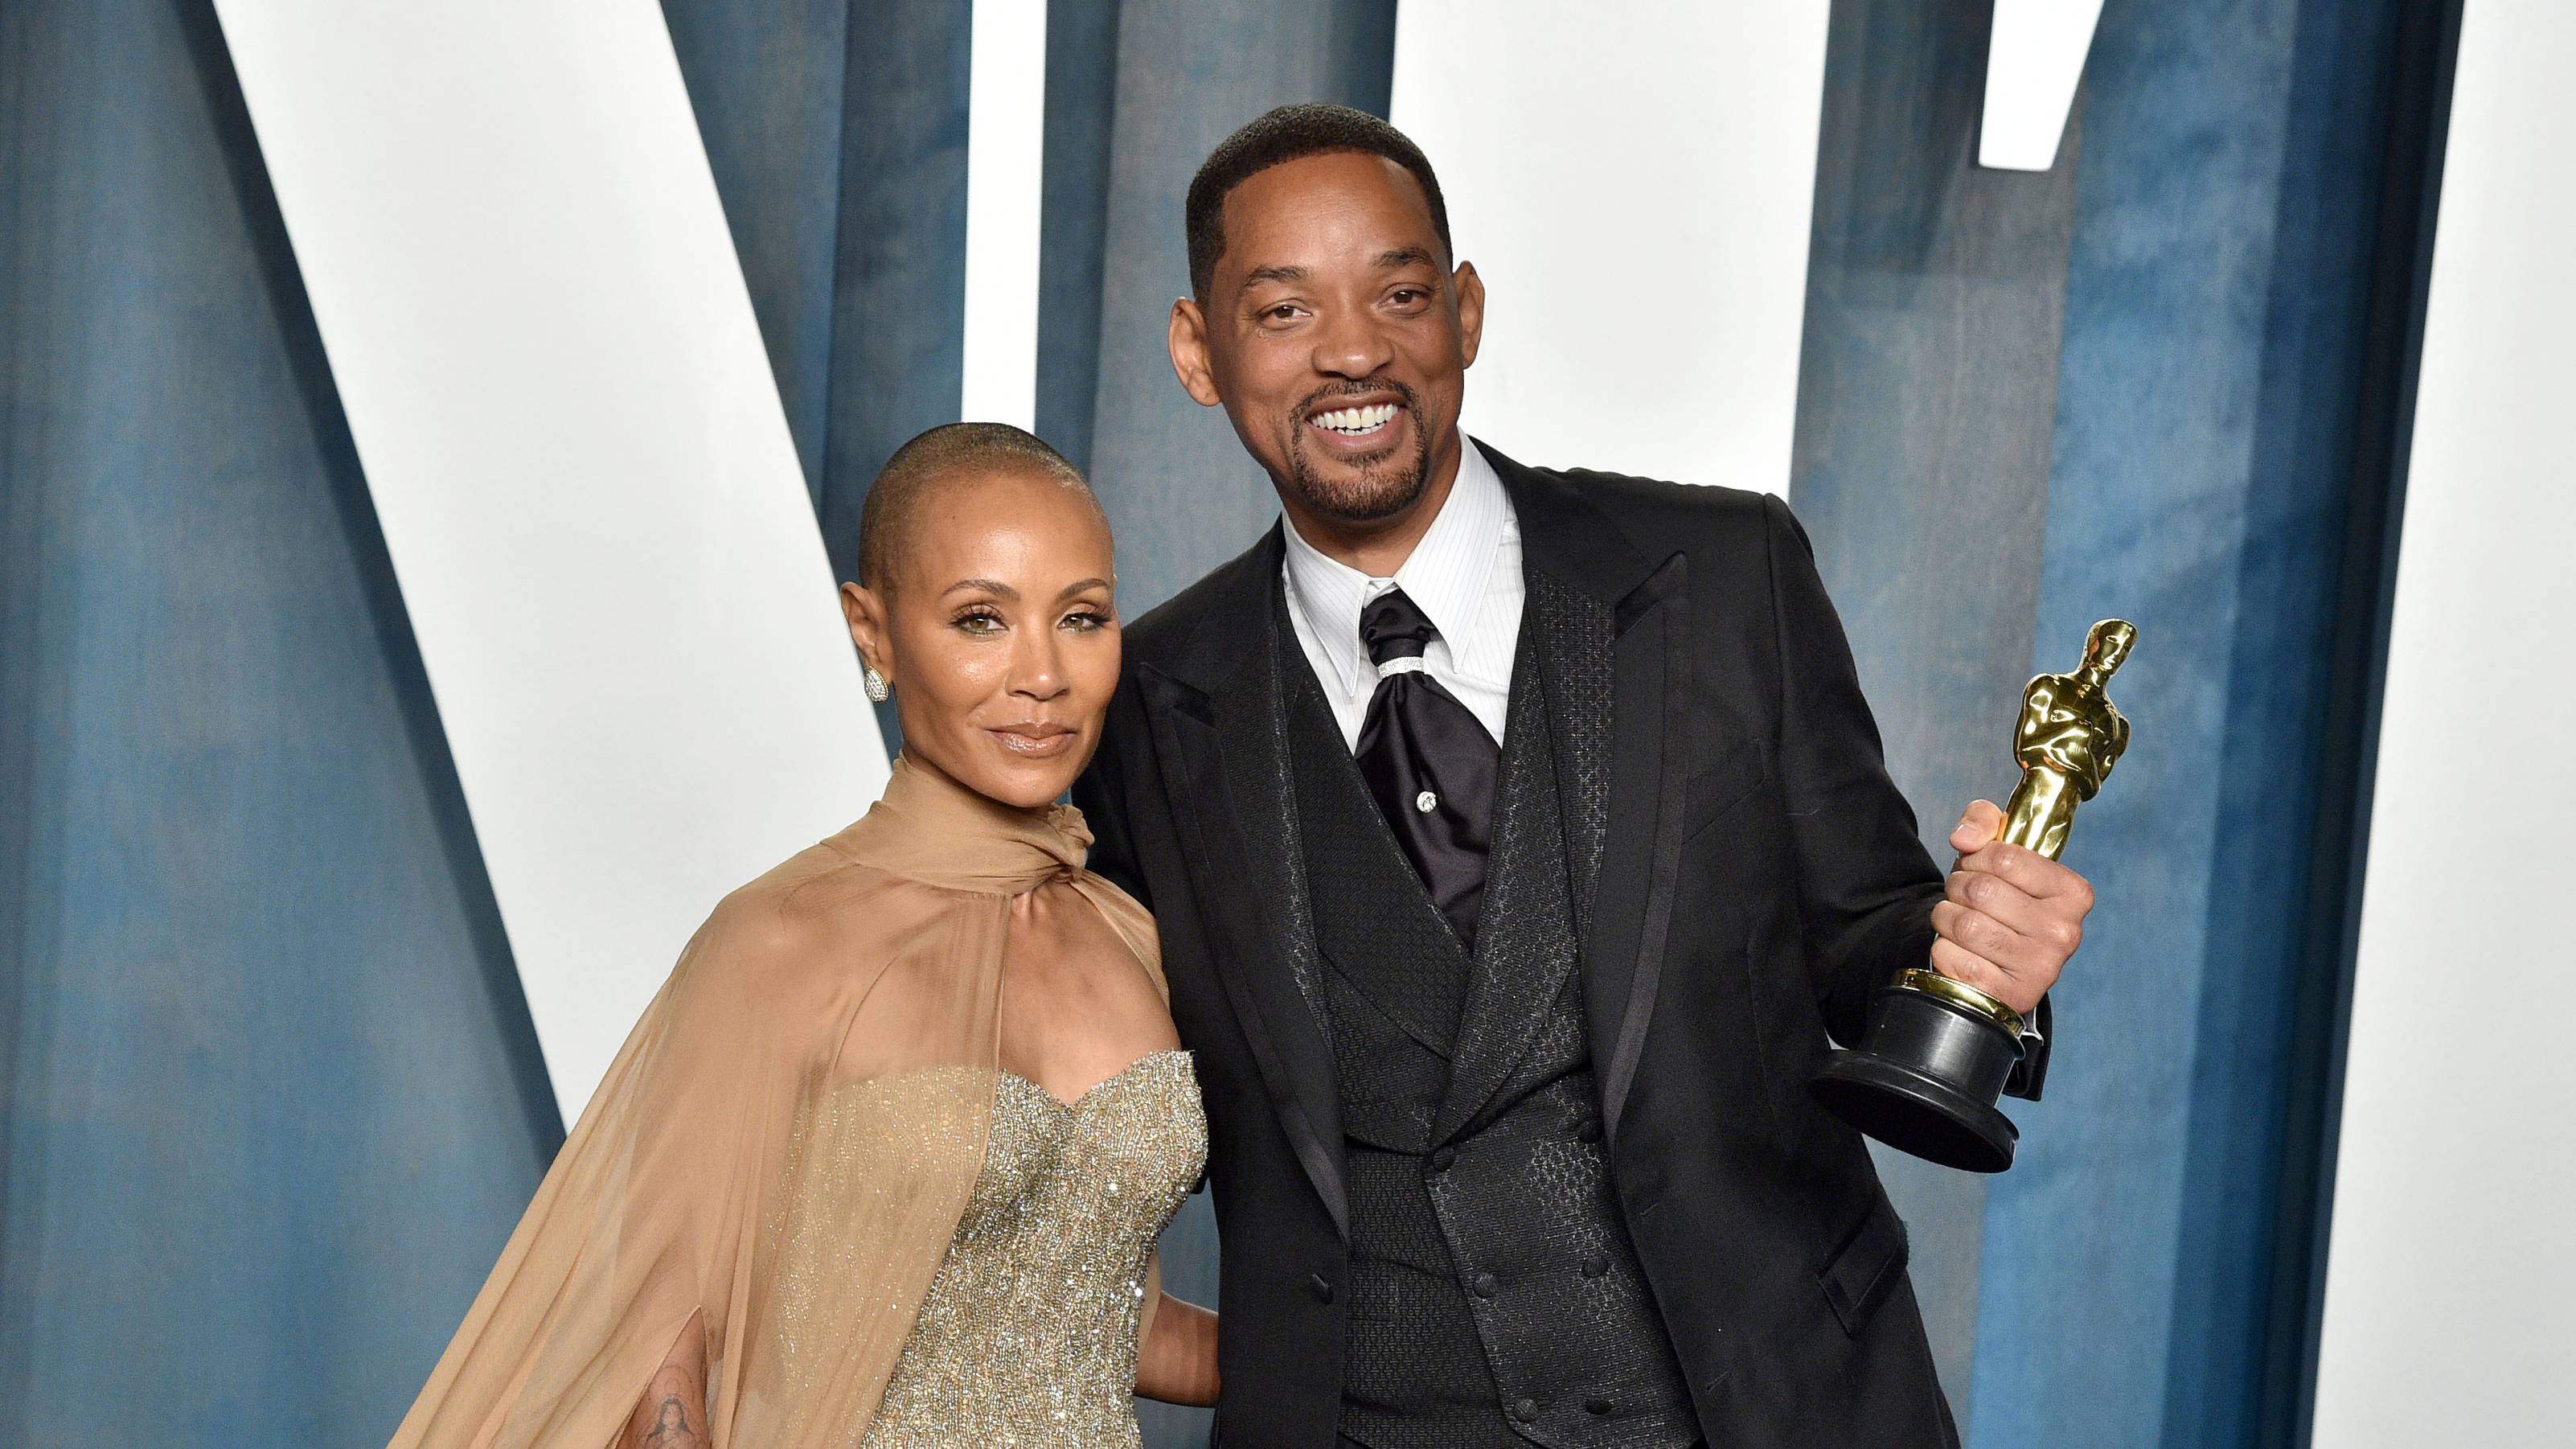 Will Smith and Jada Pinkett Smith attend the 2022 Vanity Fair Oscar Party hosted by Radhika Jones at Wallis Annenberg Center for the Performing Arts on March 27, 2022 in Beverly Hills, California. 